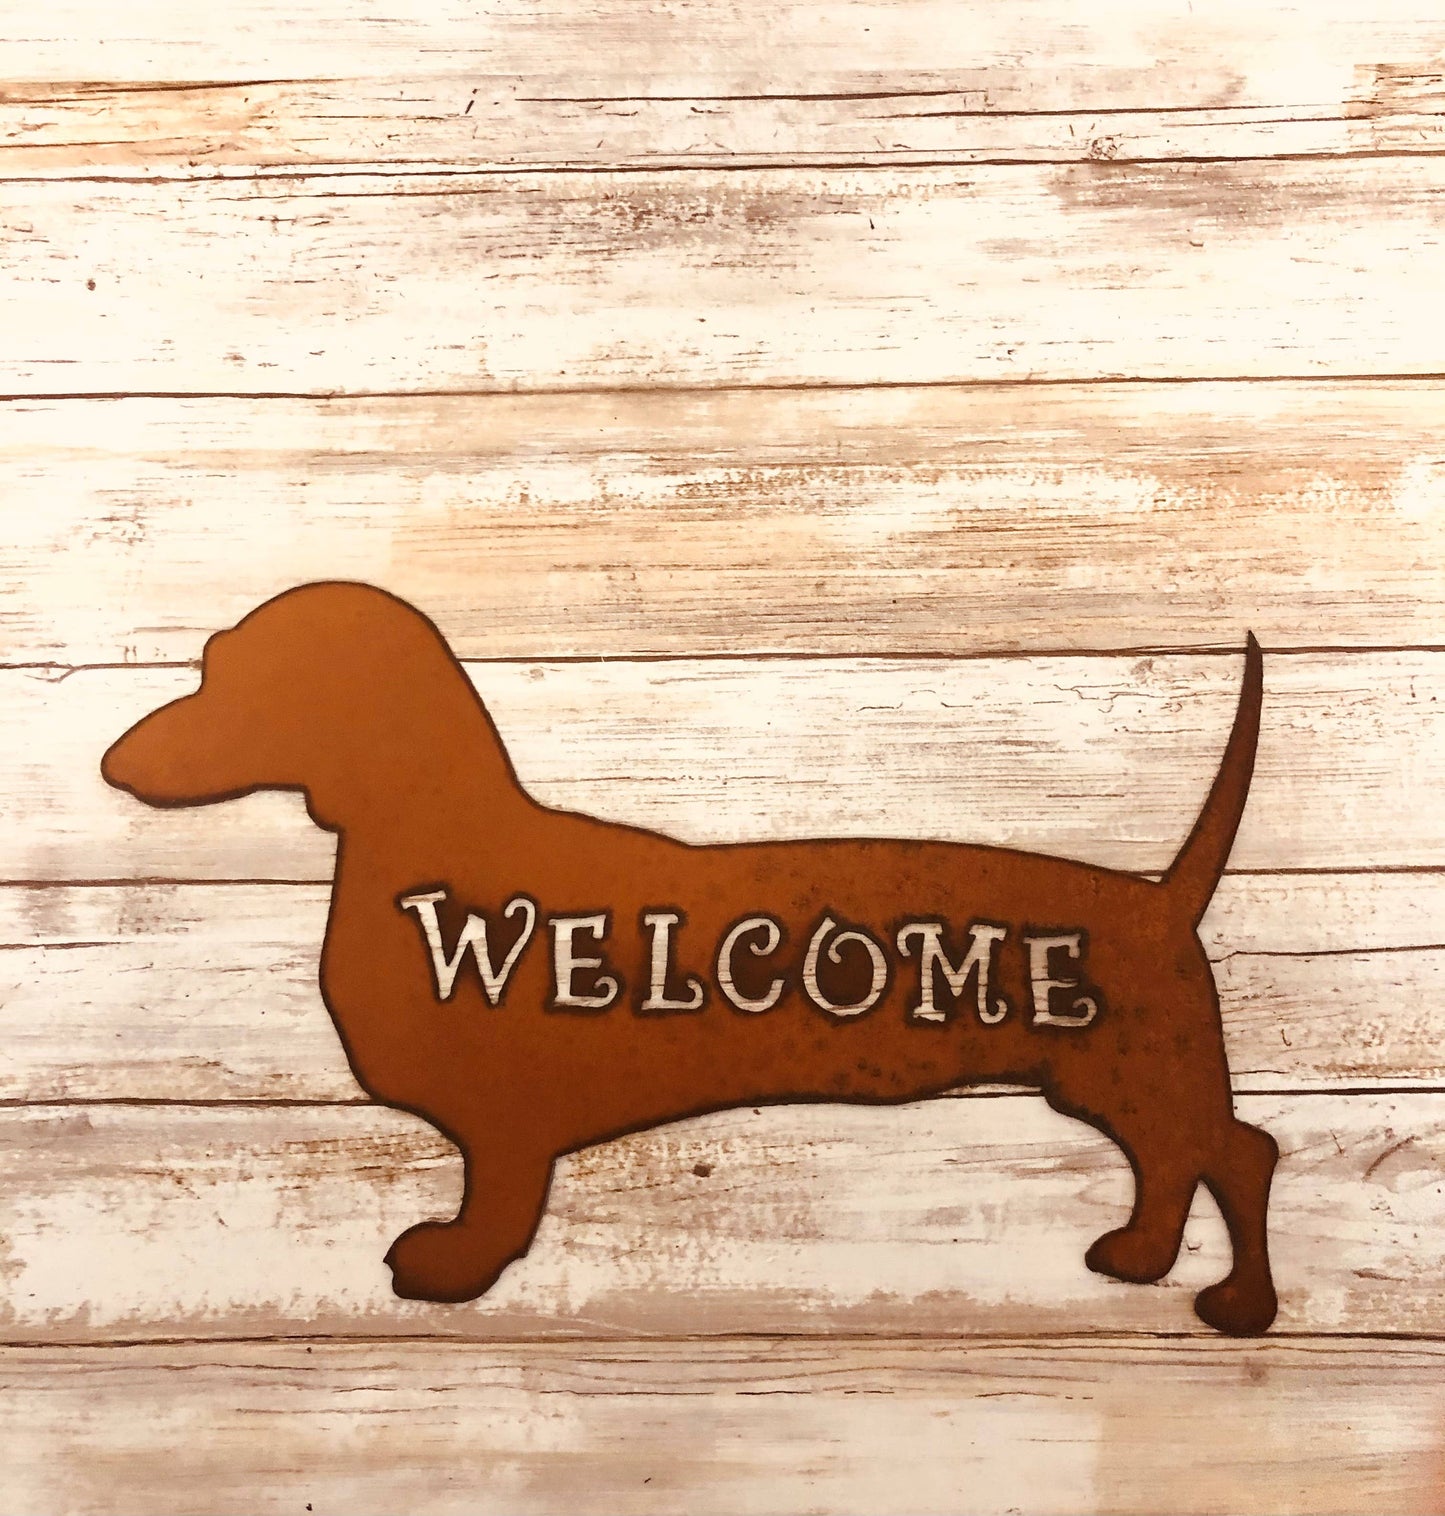 Dachshund Wiener Image Welcome Dog Rustic Metal Sign